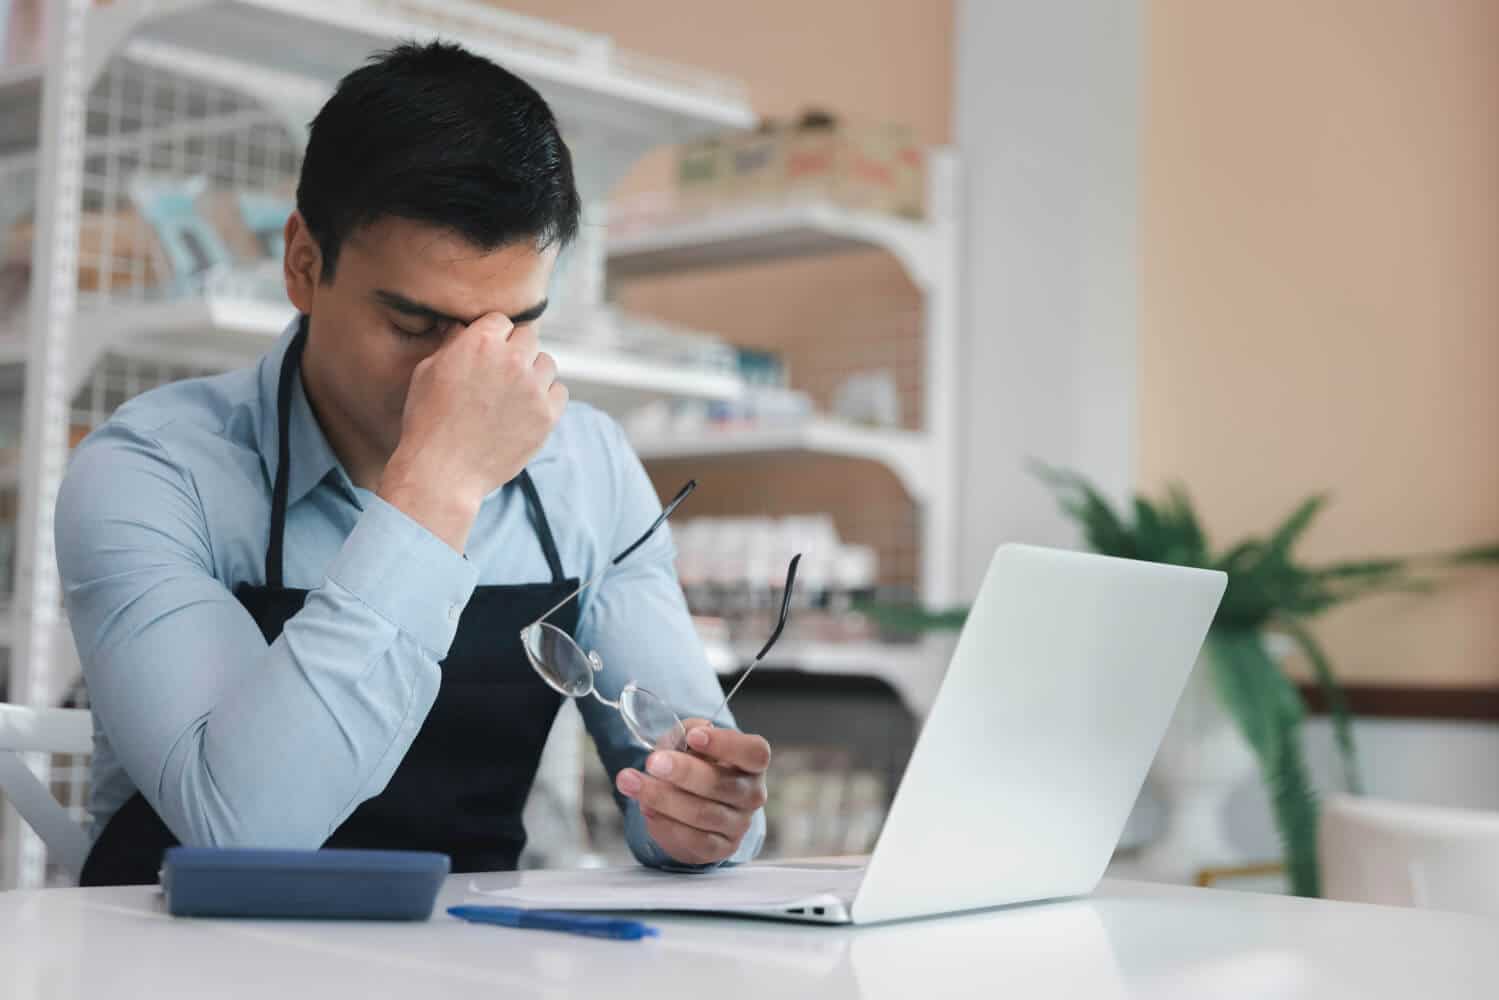 Small business owner makes accounting mistakes